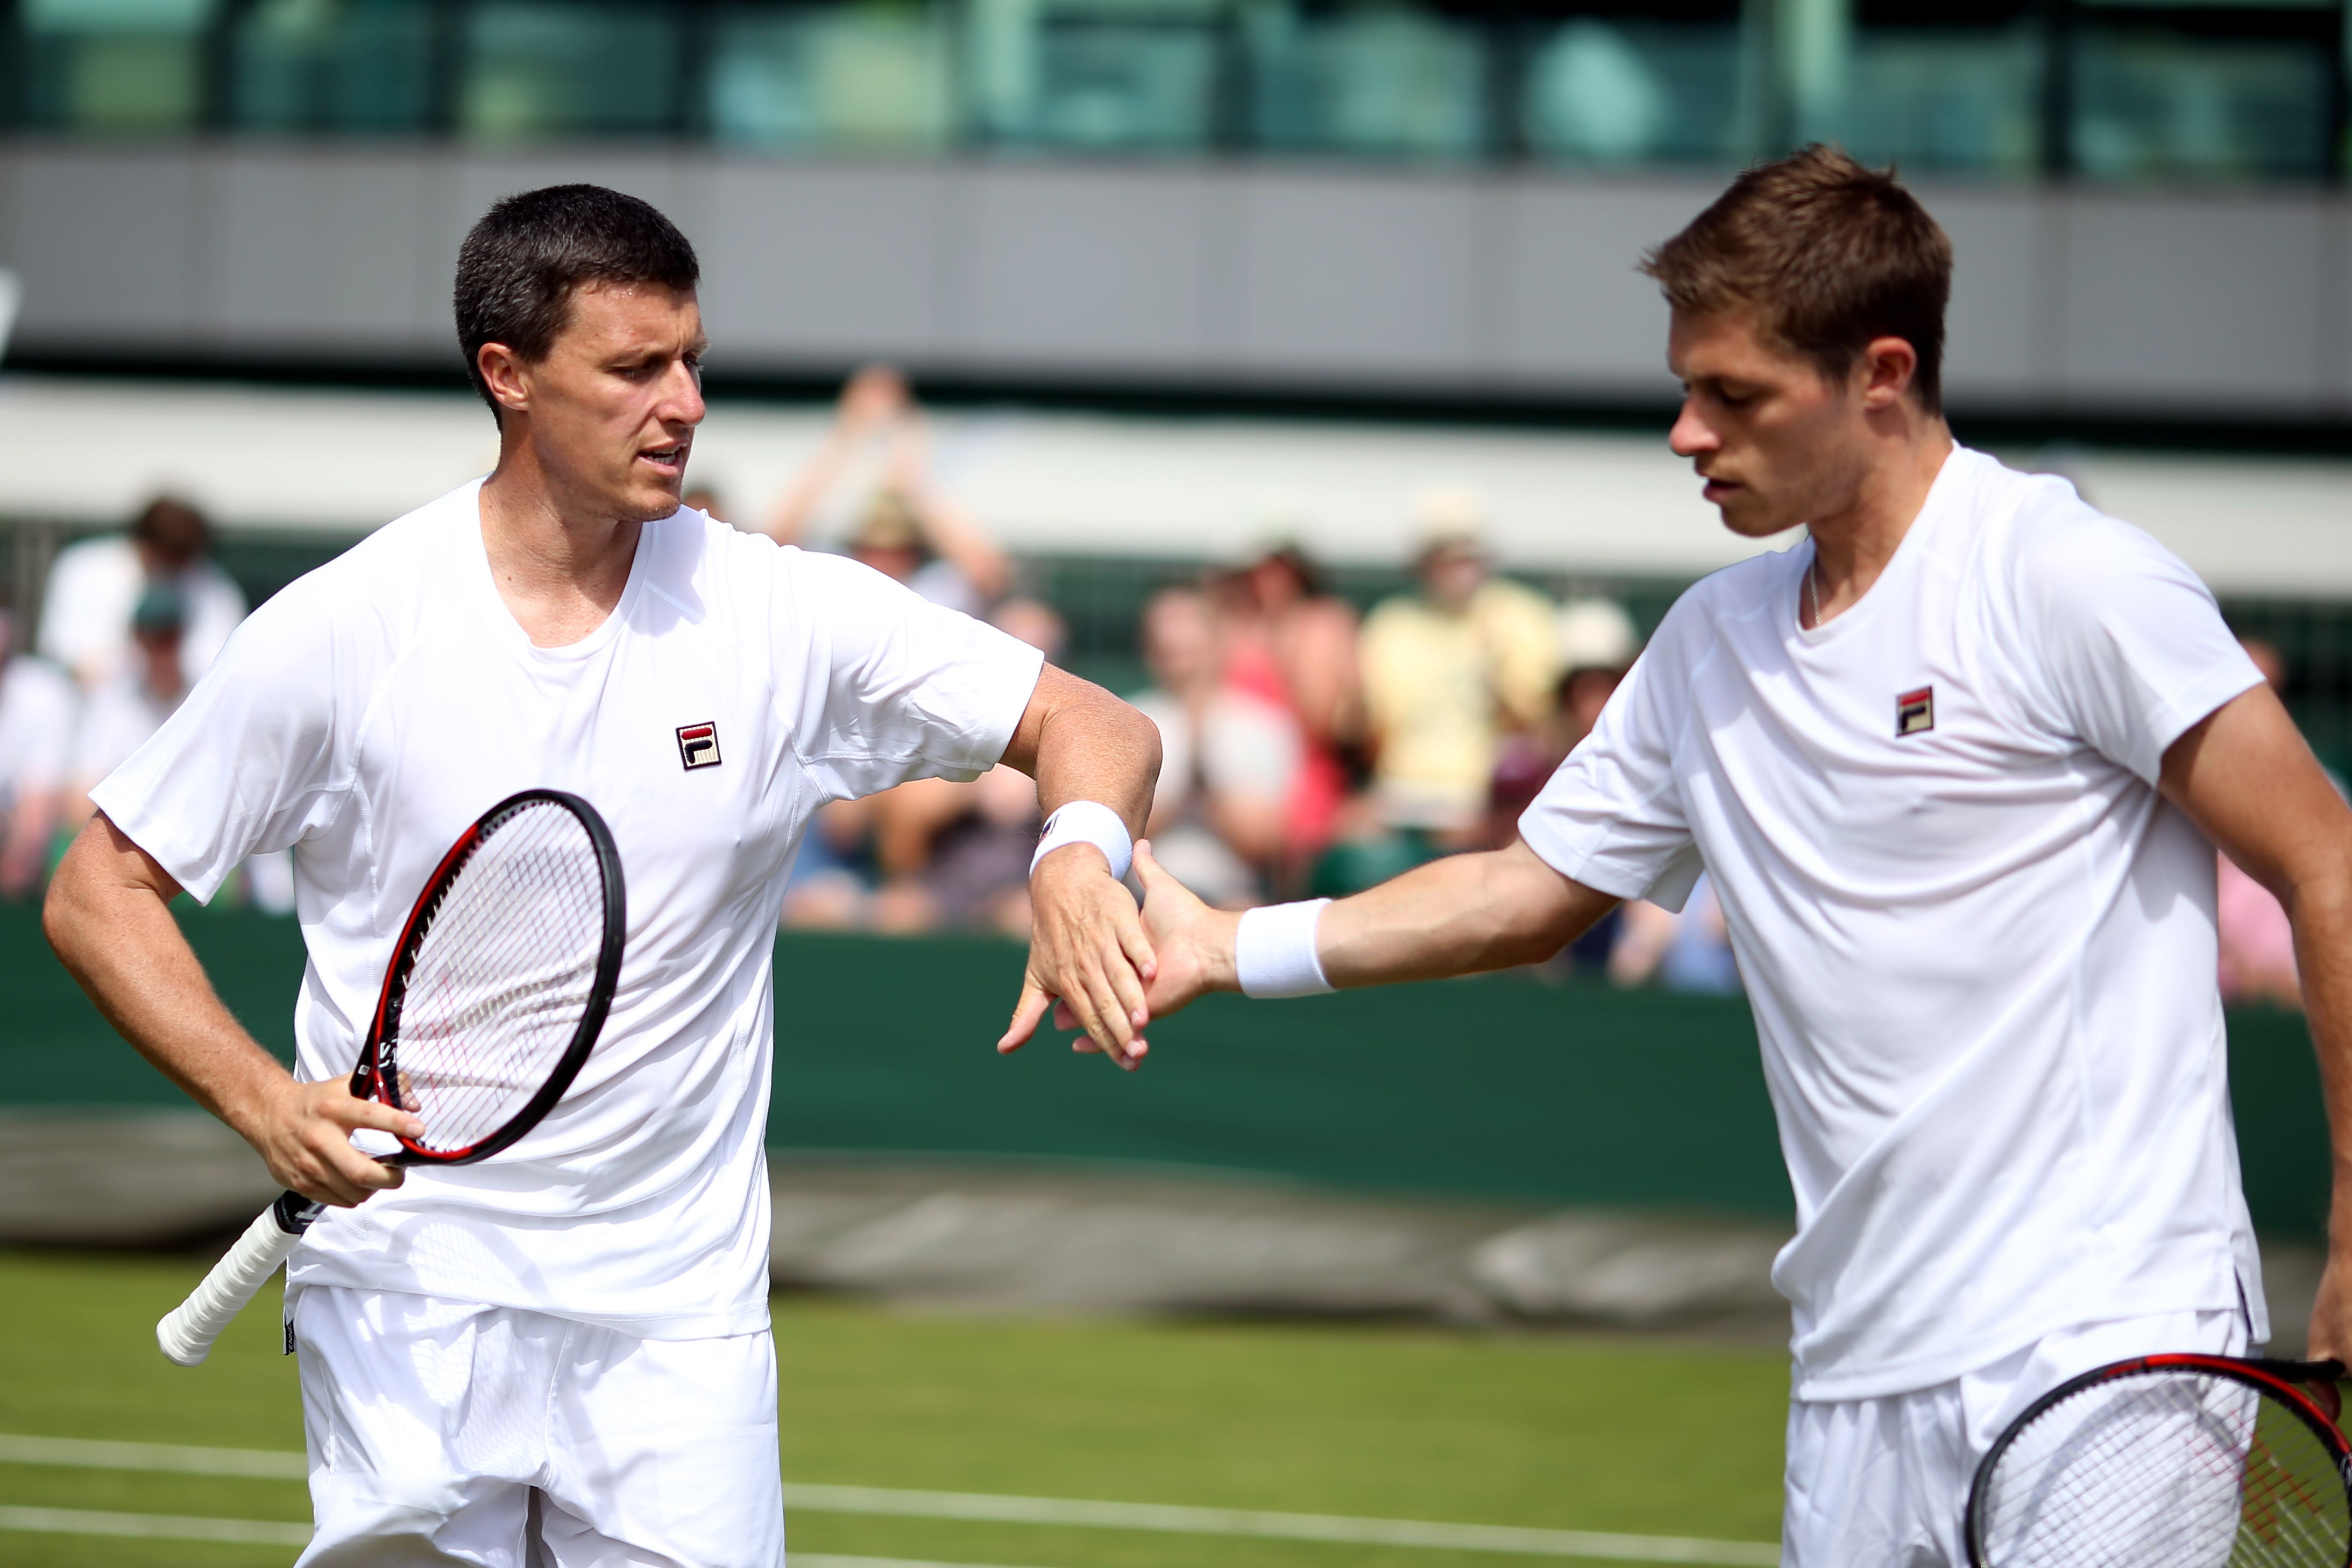 Neal Skupski gives brother Ken a conundrum by reaching Wimbledon semi-finals The Independent